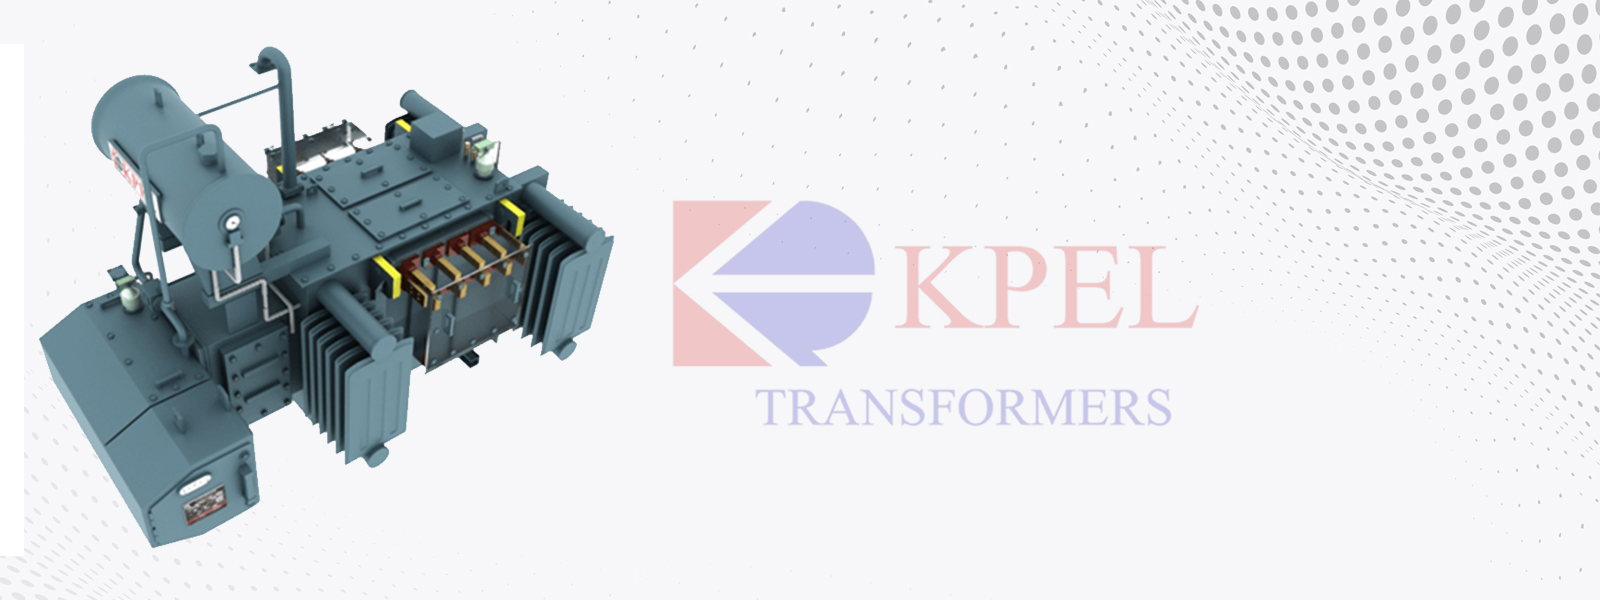 Top Transformers Manufacturer Company